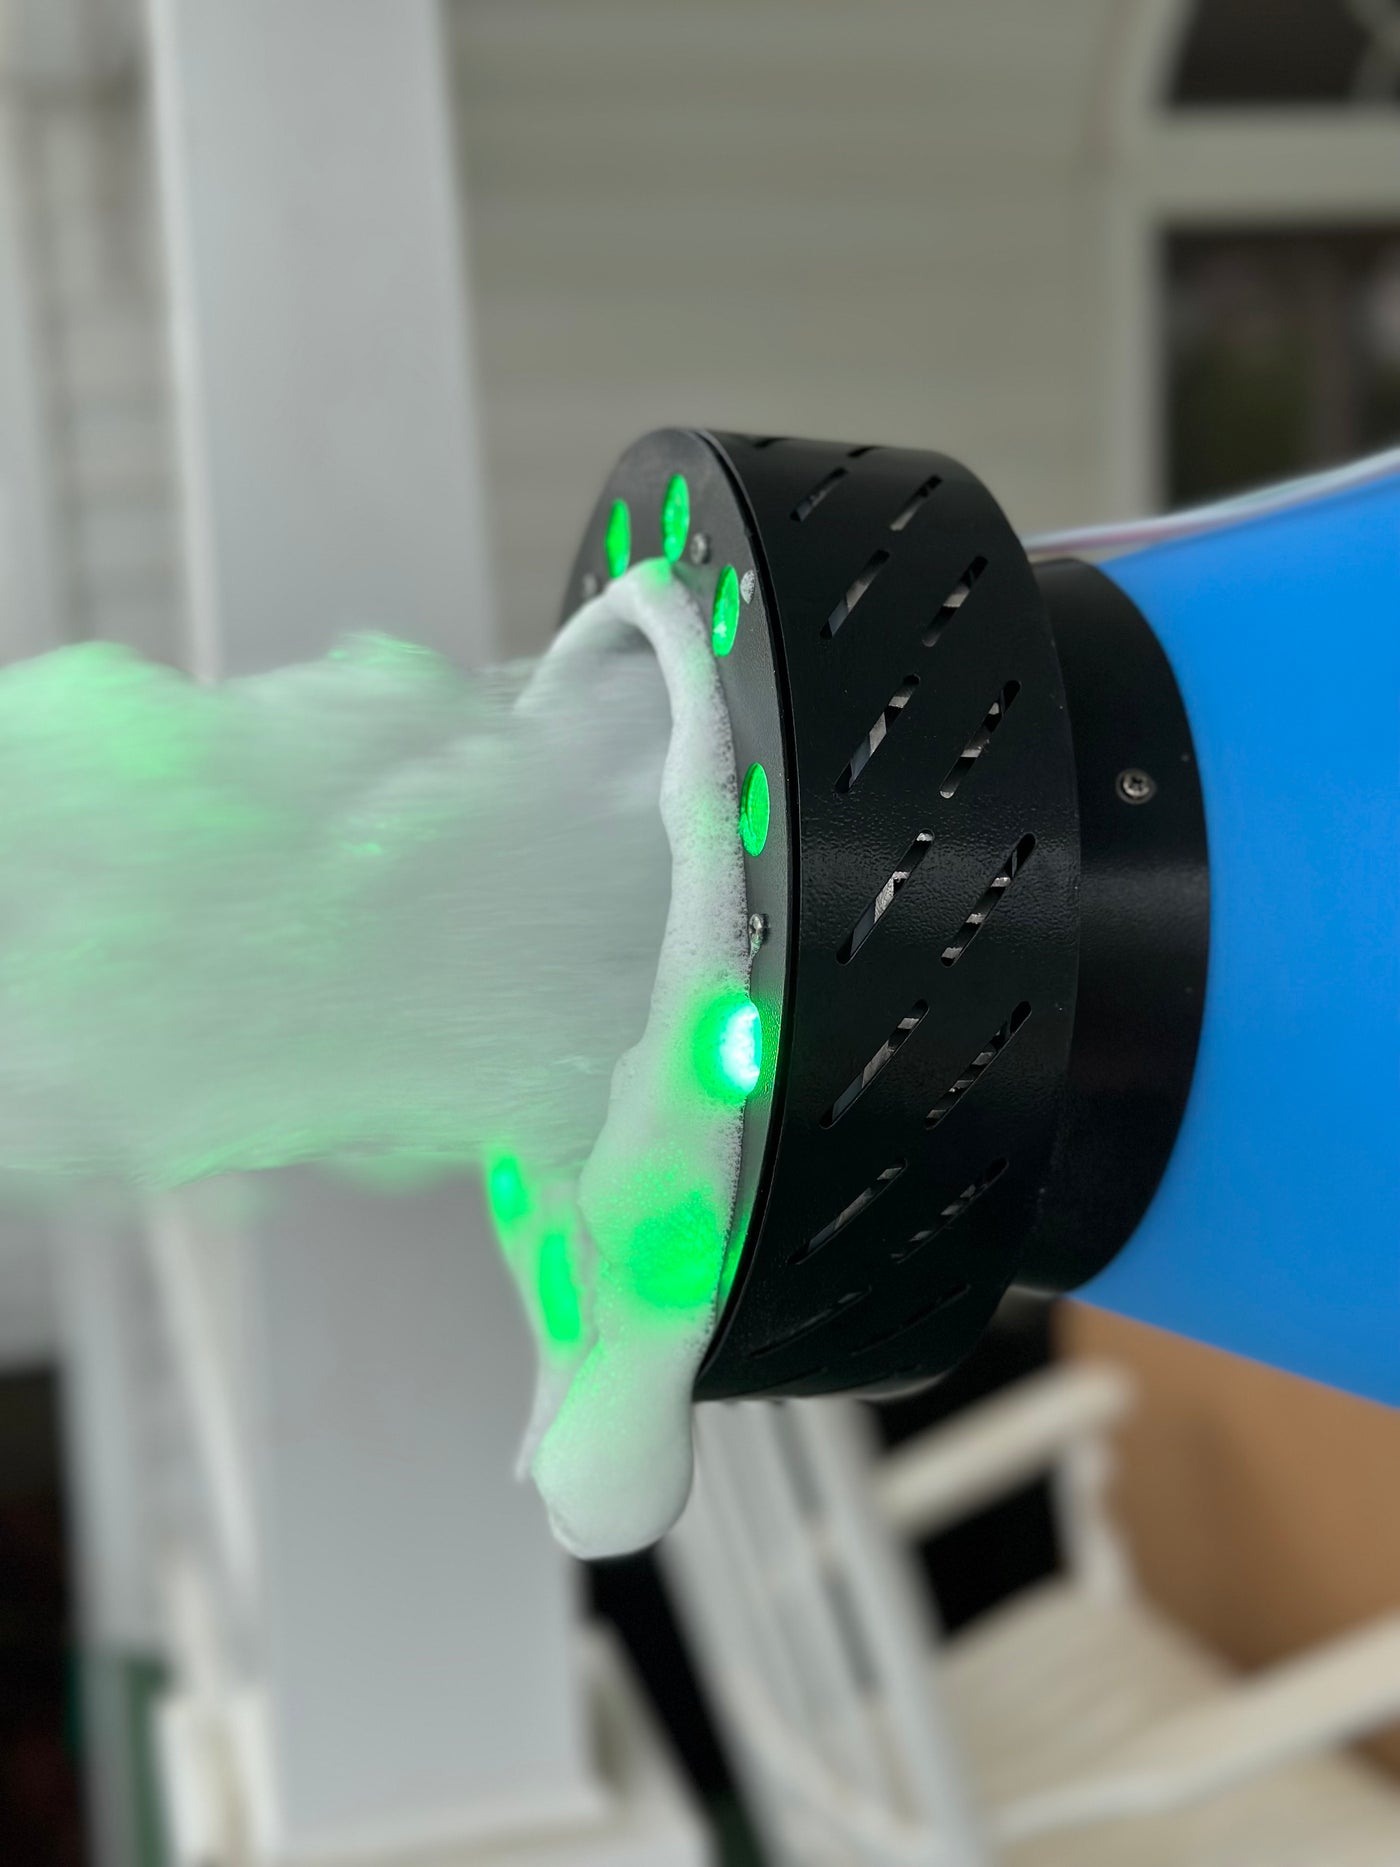 Get the LED light ring as an add on to your party foam cannon